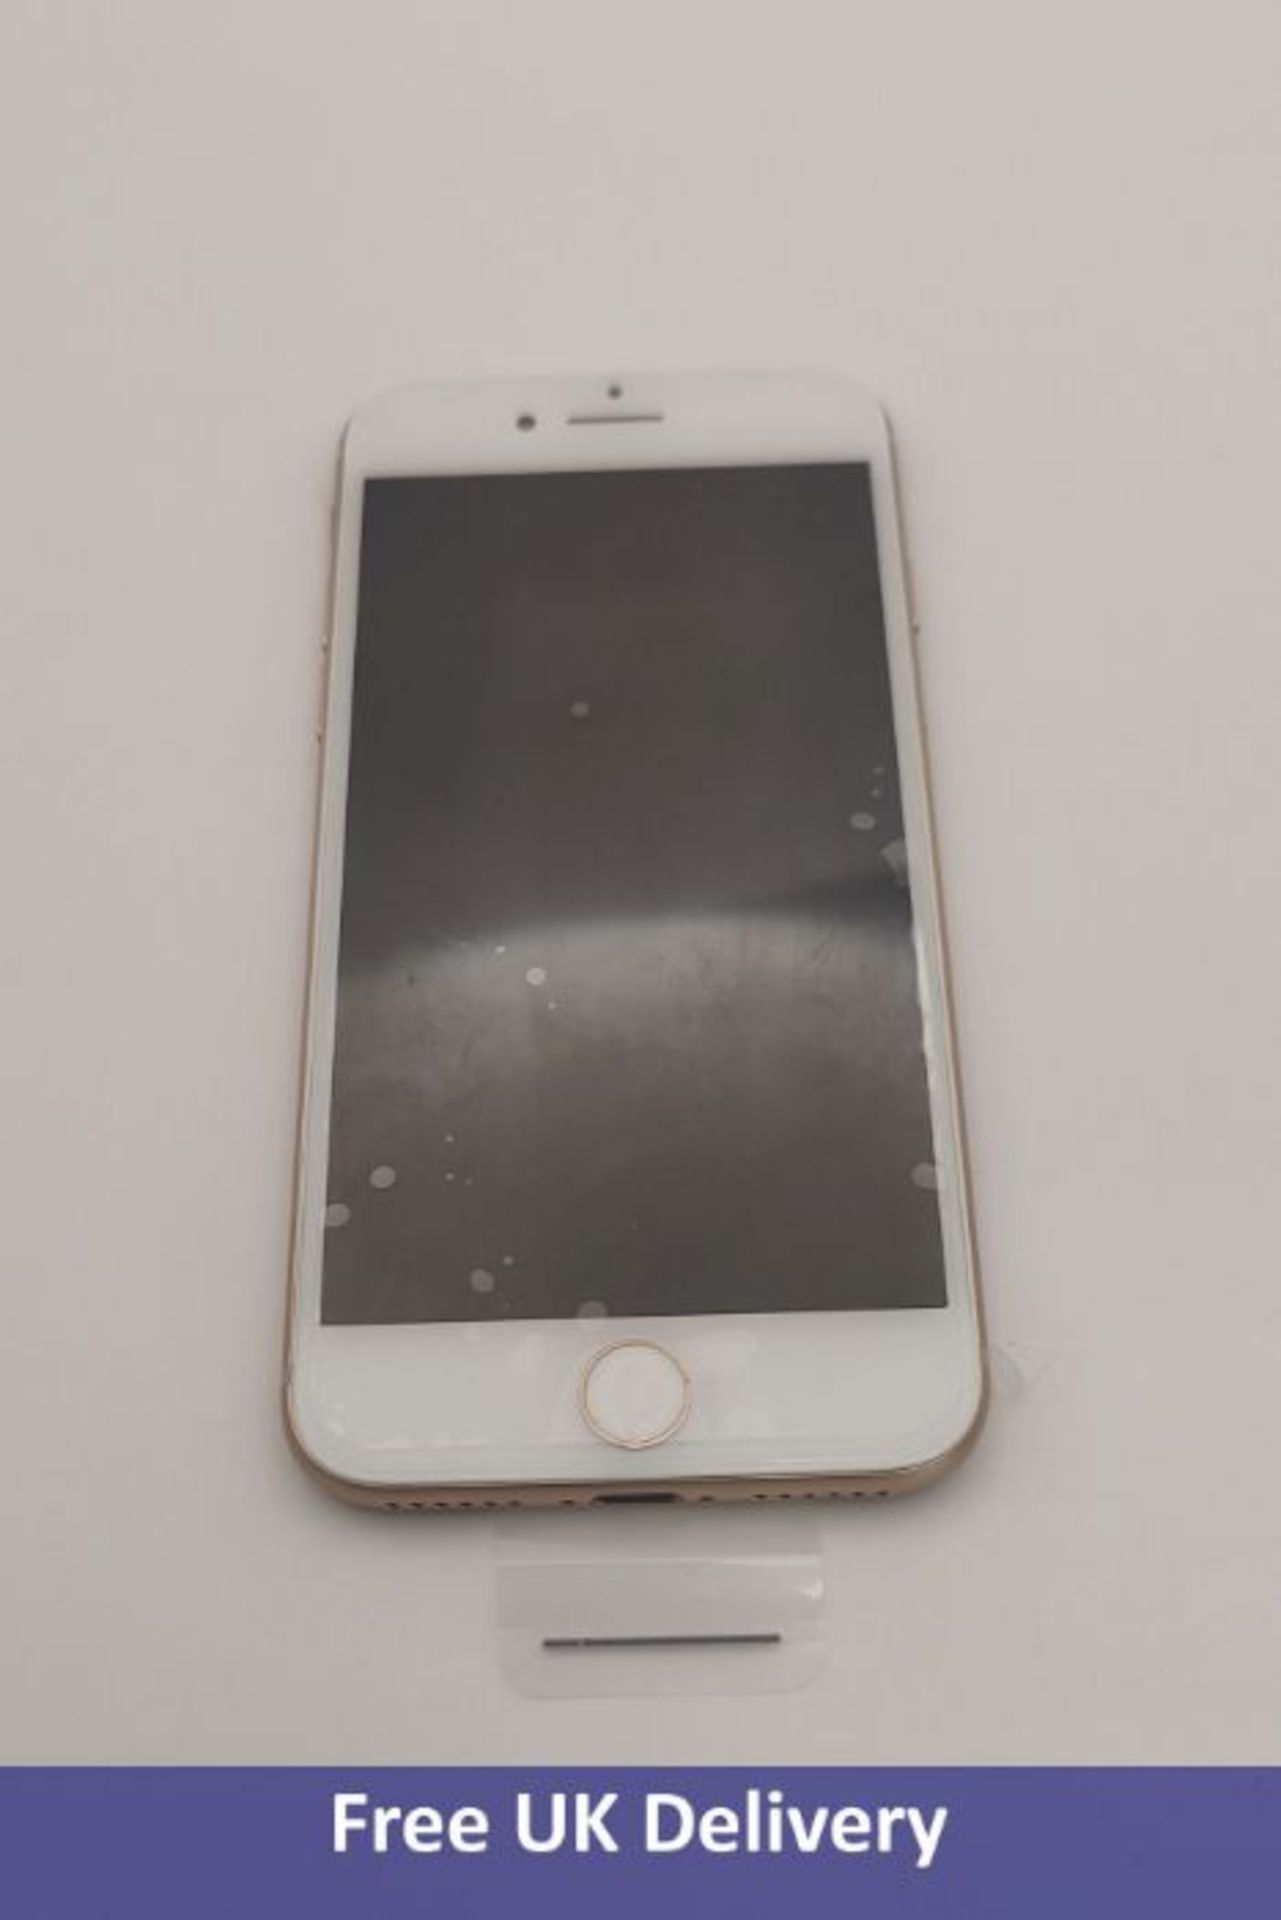 Apple iPhone 8 256GB, Gold. Used, no box or accessories. Checkmend clear, ref. CM18332085-A570D